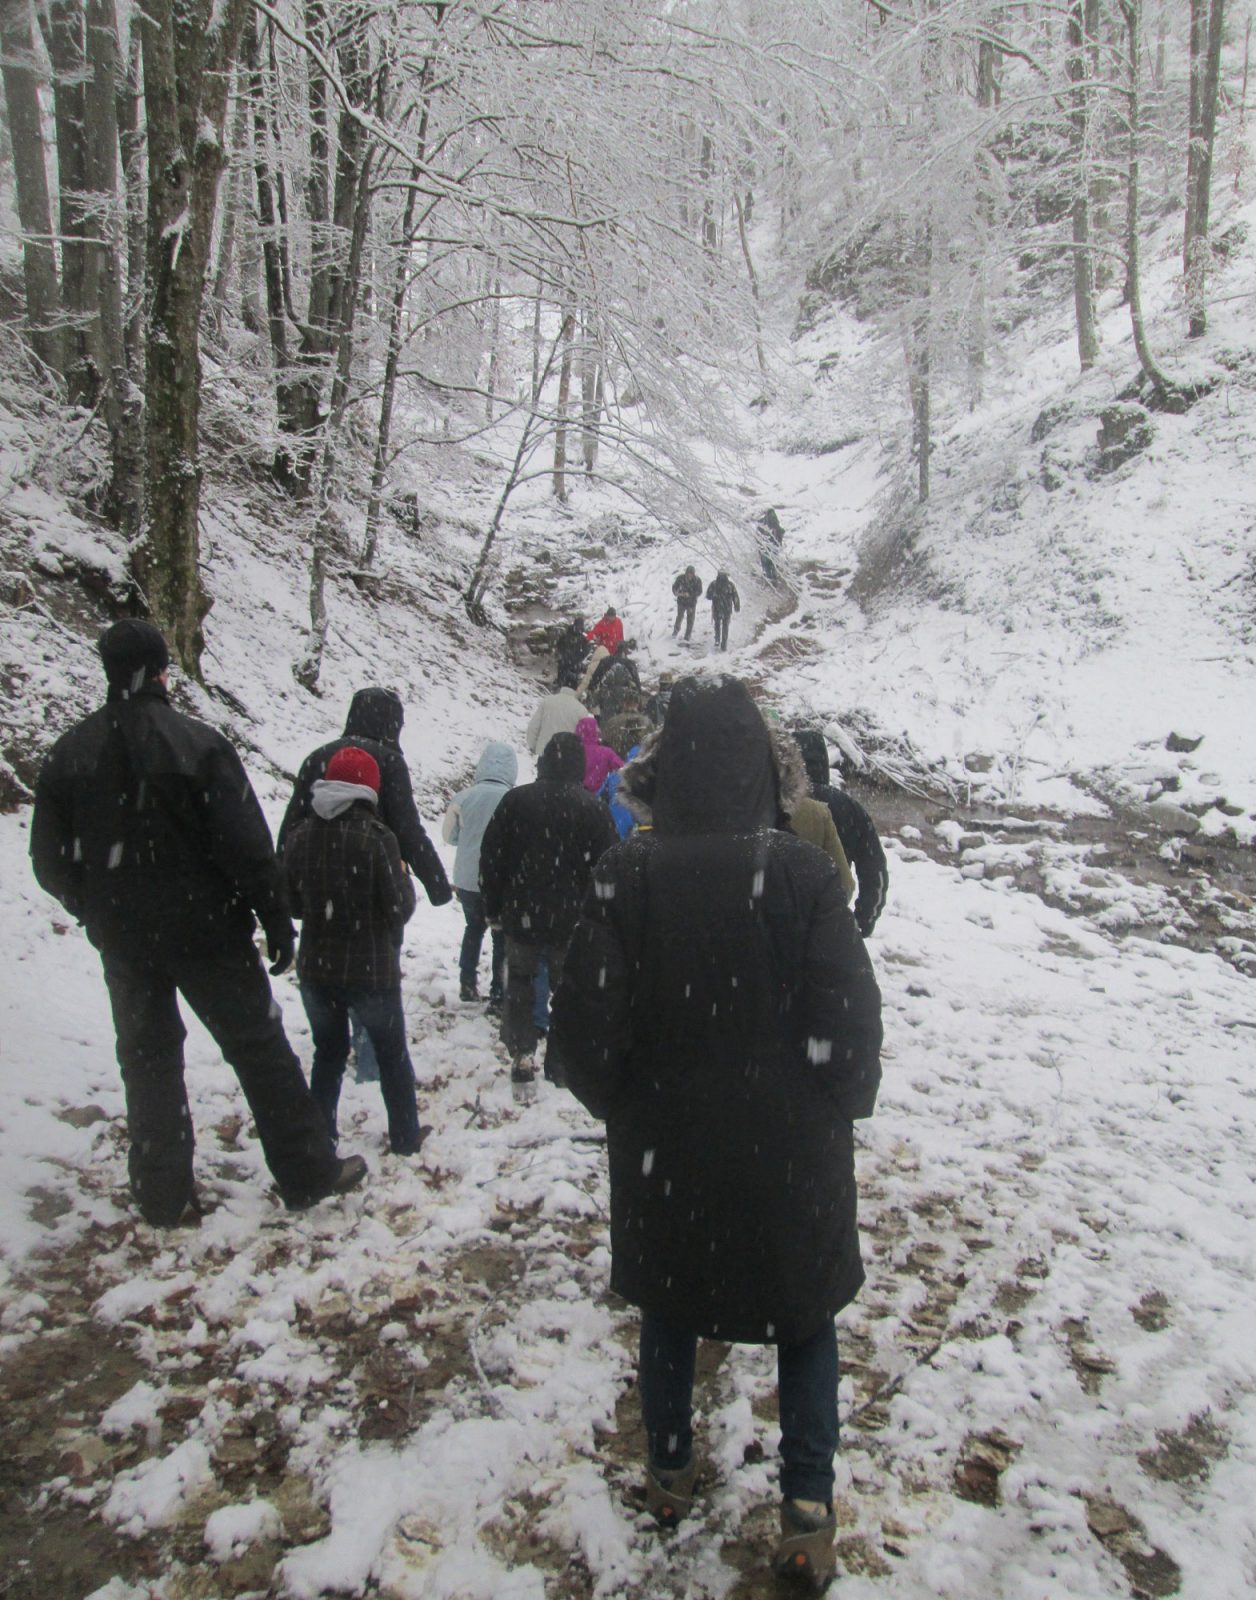 A group of people seen from behind walking through snow-covered woods.